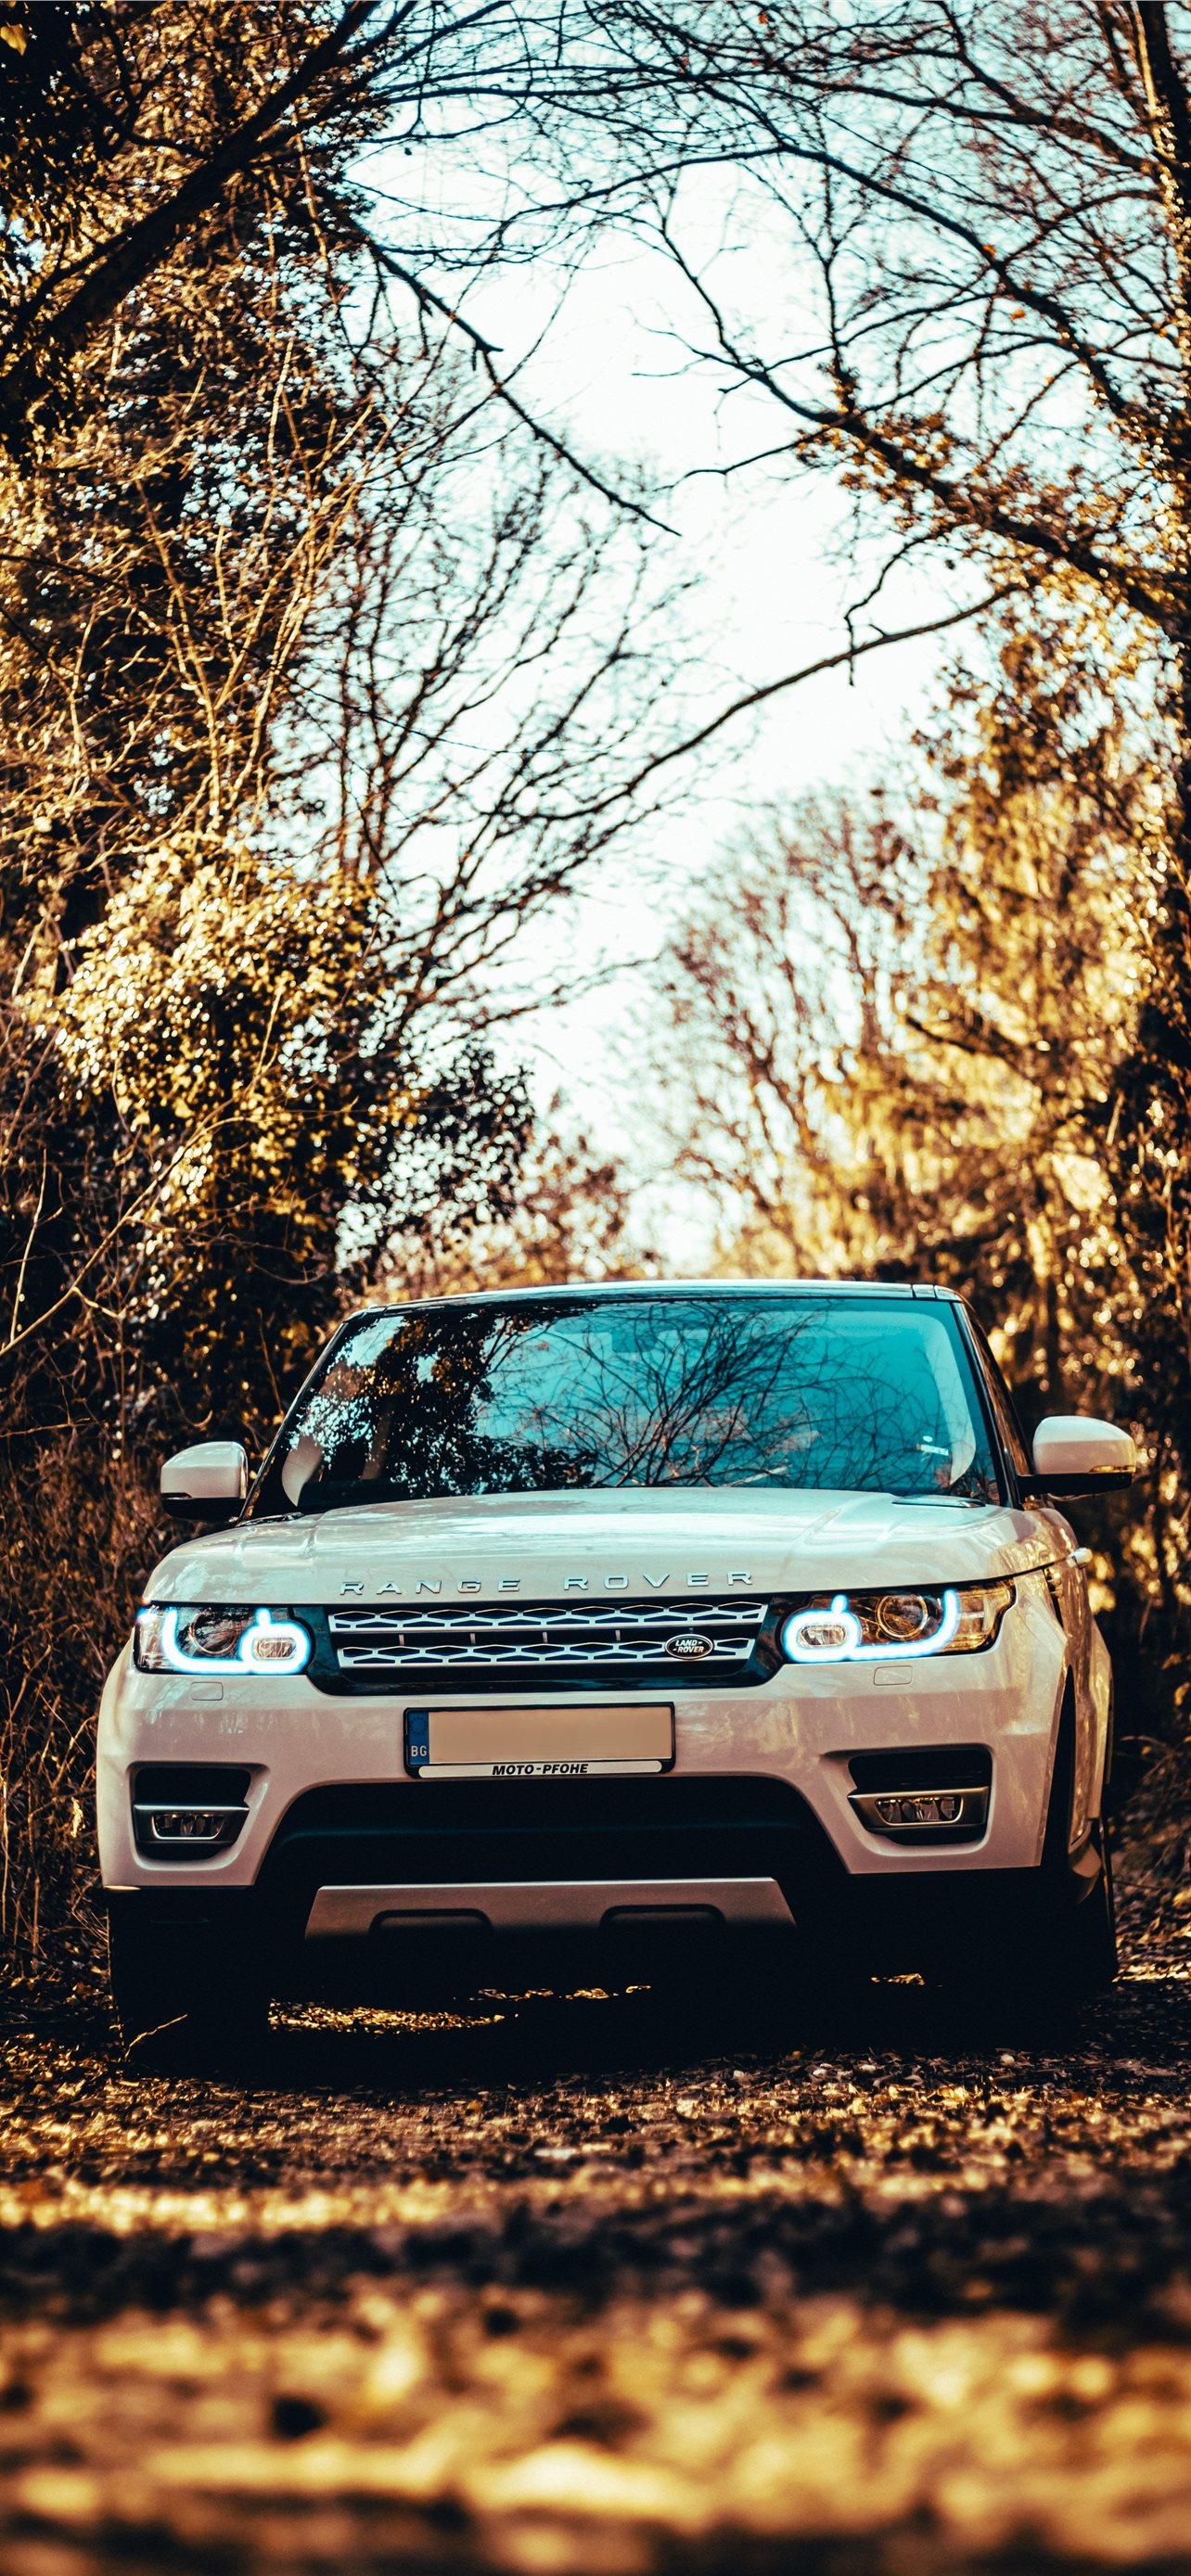 500 Land Rover Pictures  Download Free Images on Unsplash